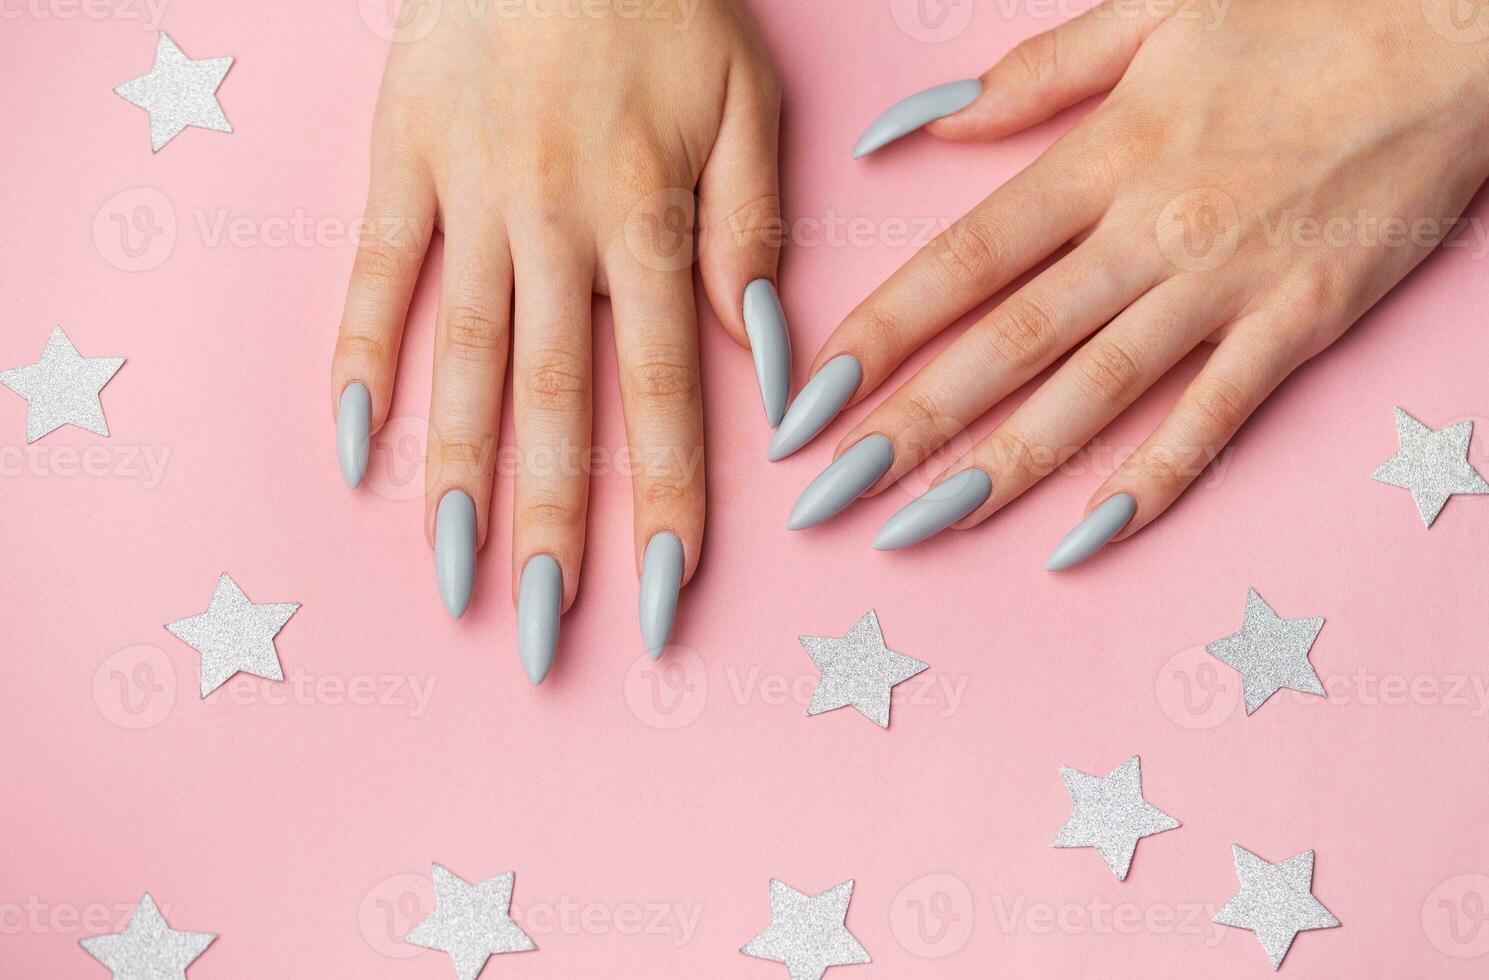 Hands with grey manicure on a pink background photo